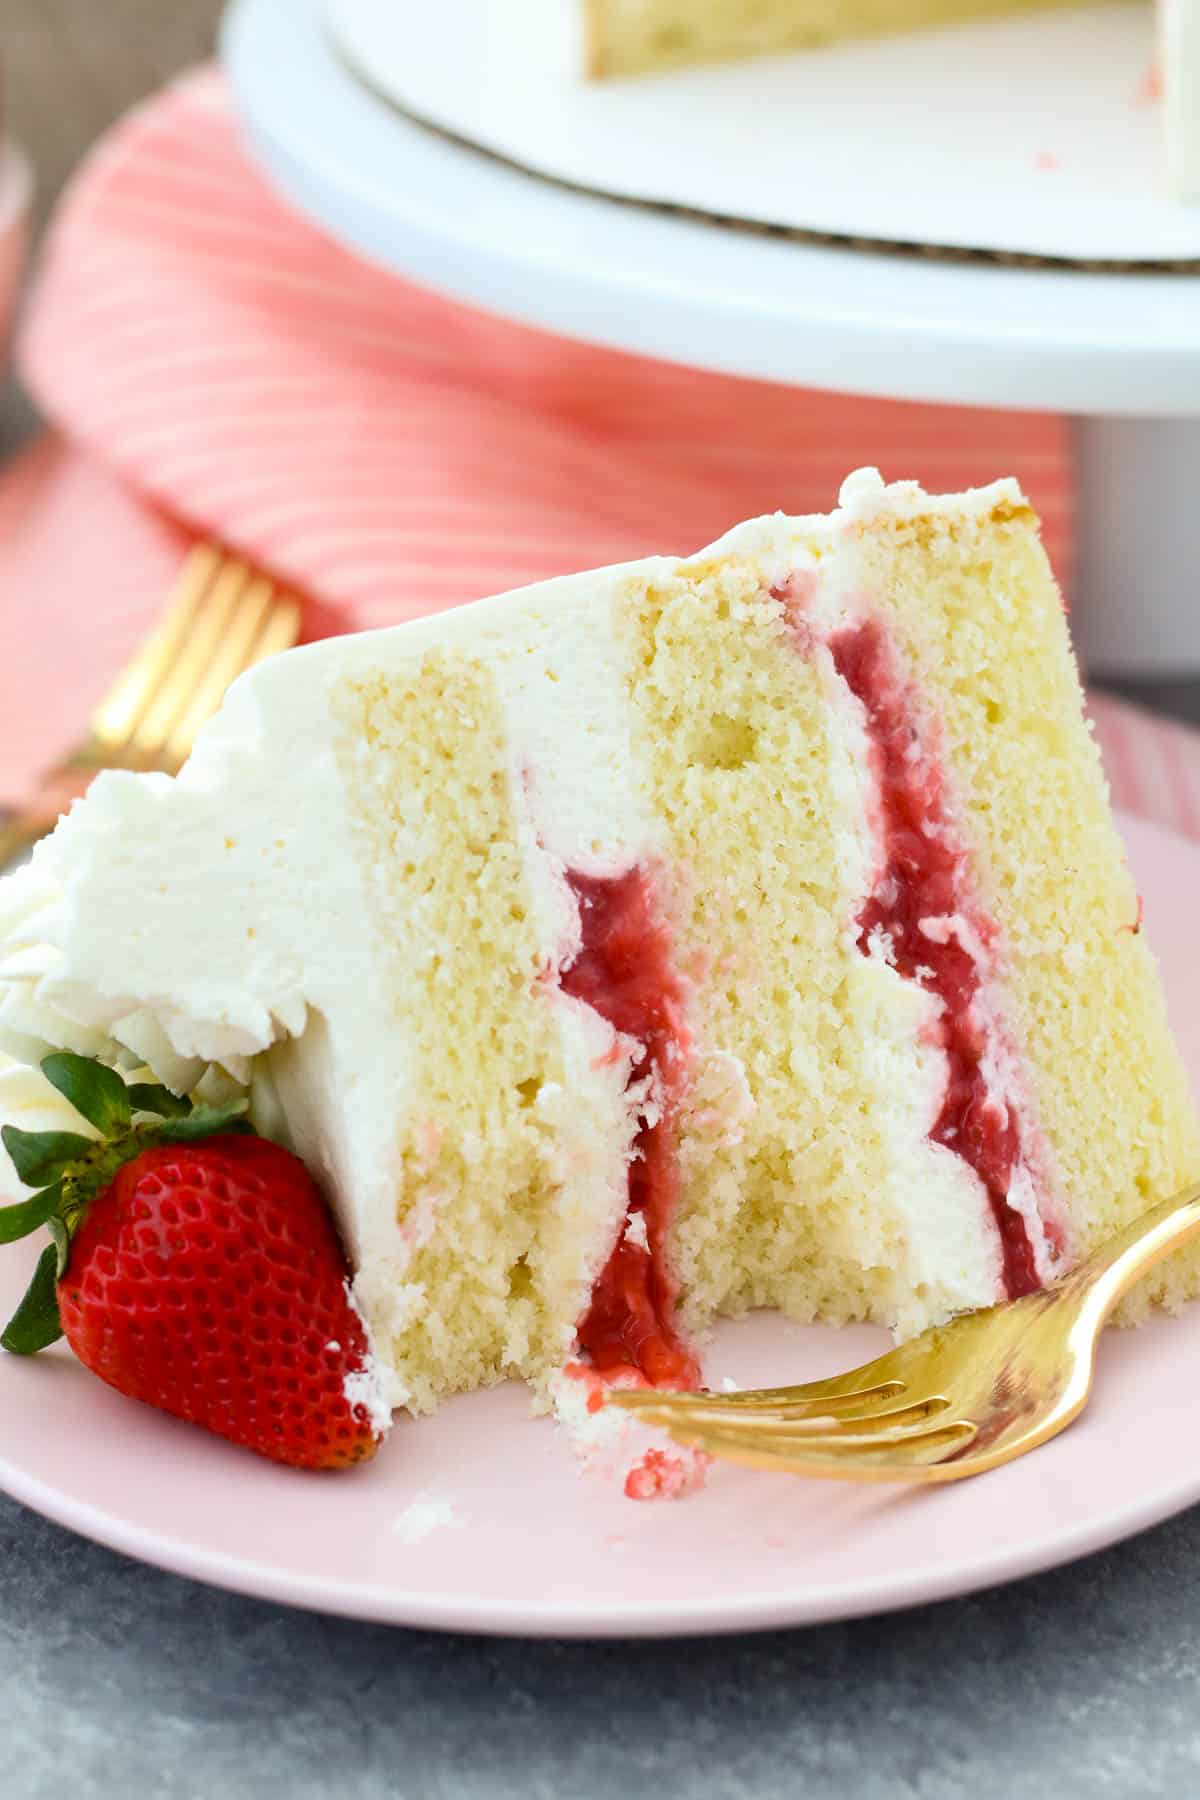 A slice of strawberry mascarpone cake on a pink plate garnished with a fresh strawberry, next to a fork.